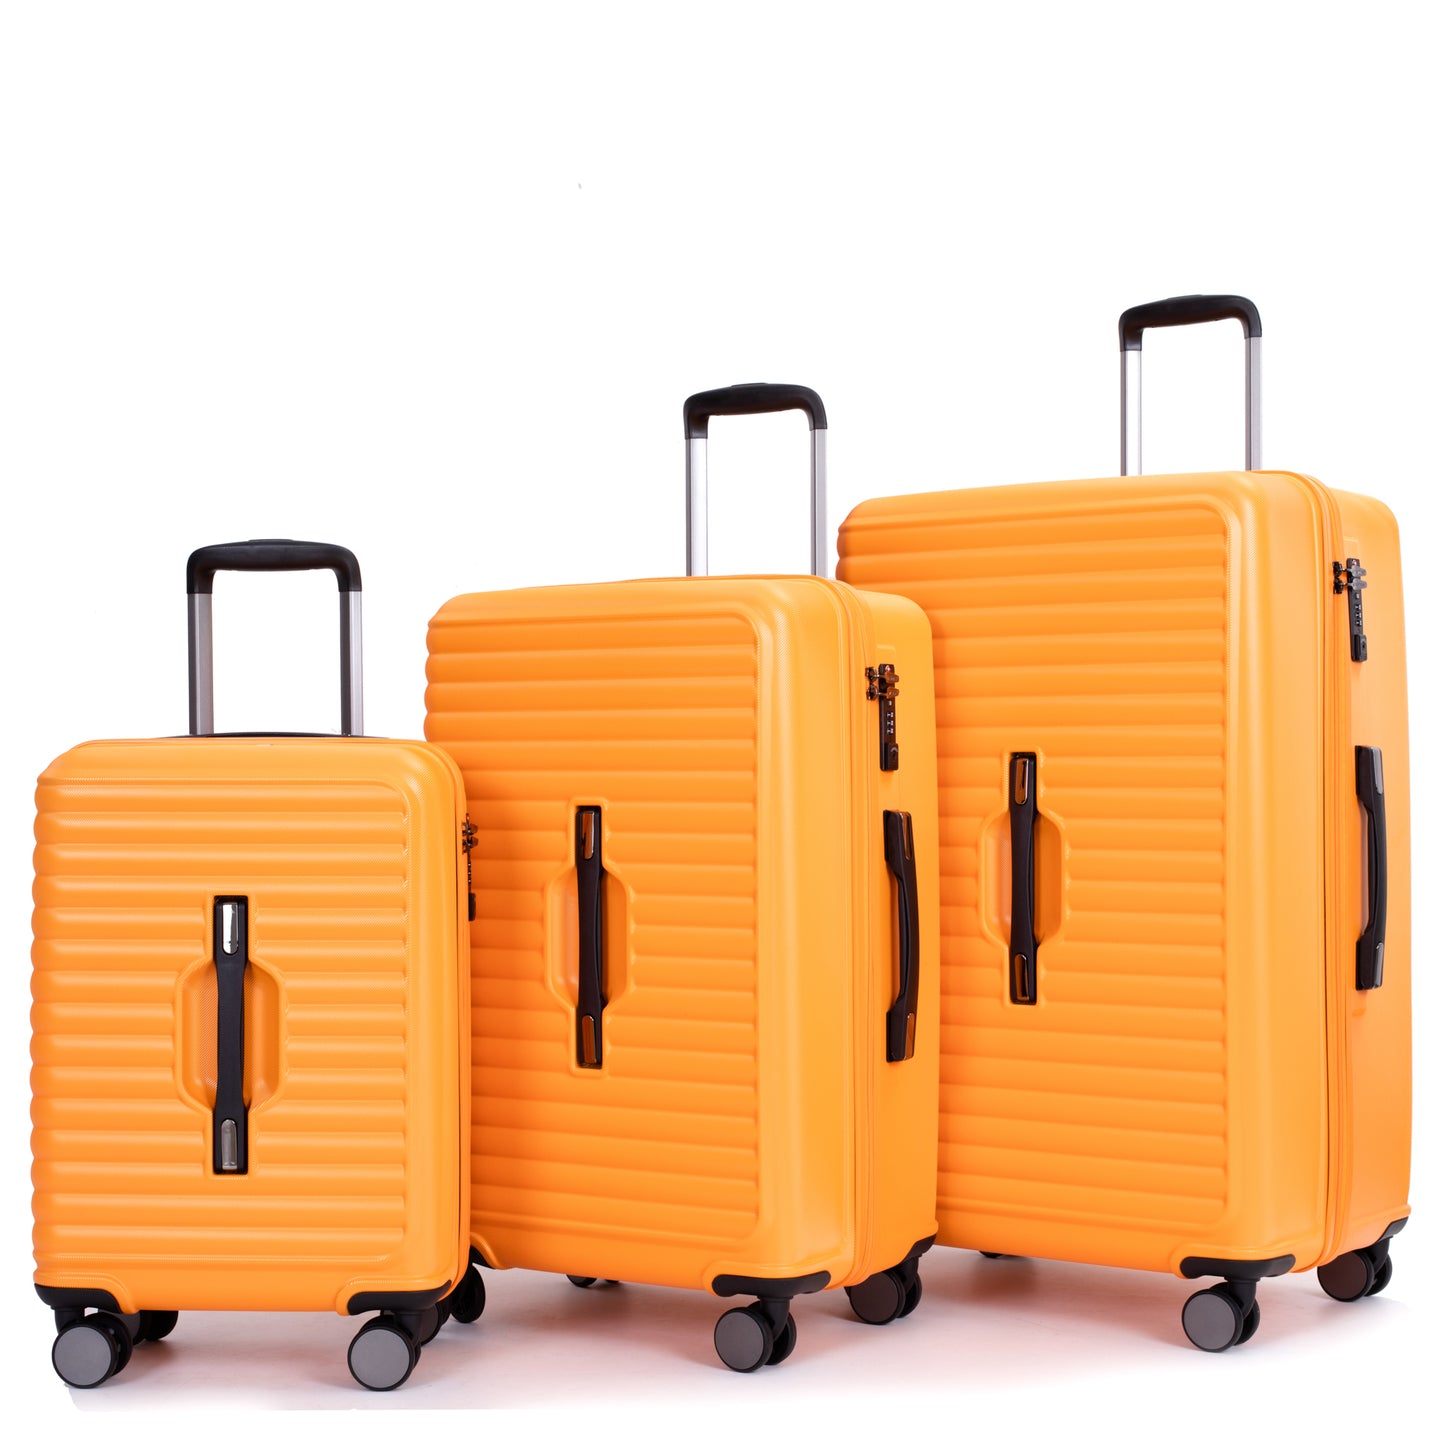 3 Piece Luggage Sets PC+ABS Lightweight Suitcase with Two Hooks, 360° Double Spinner Wheels, TSA Lock, (20/24/28) Orange